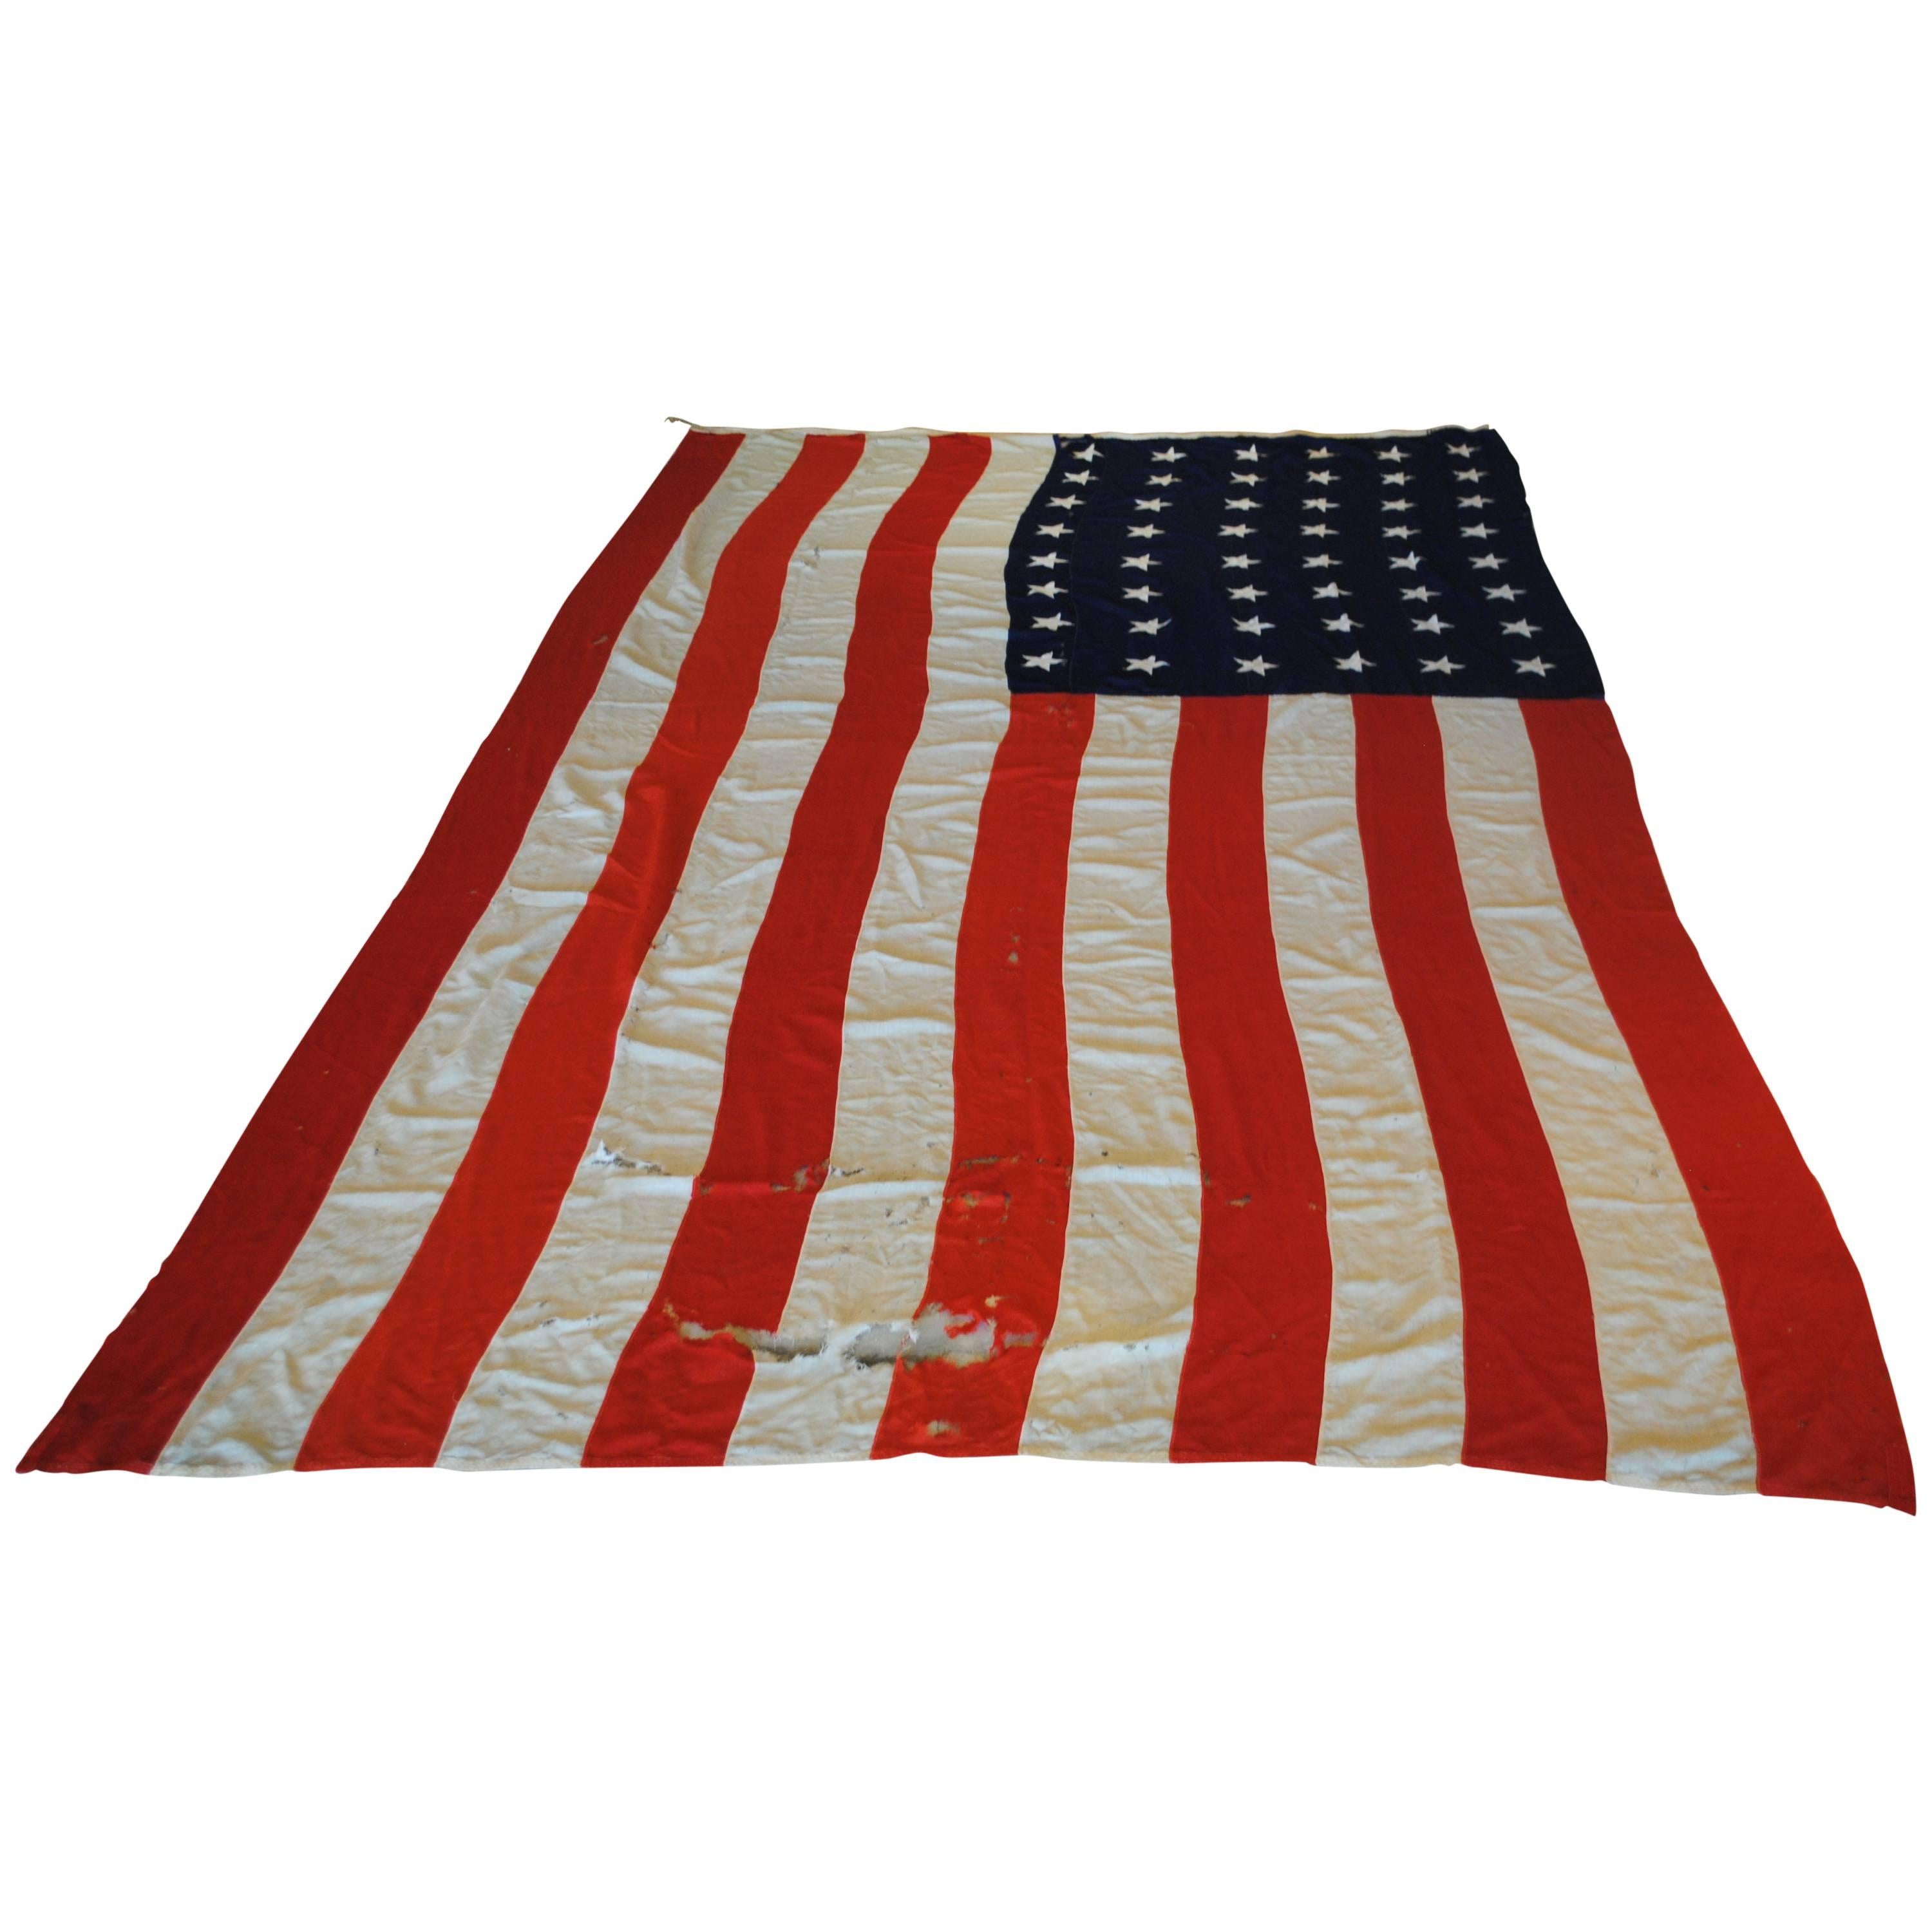 Enormous 48 Star American Flag For Sale